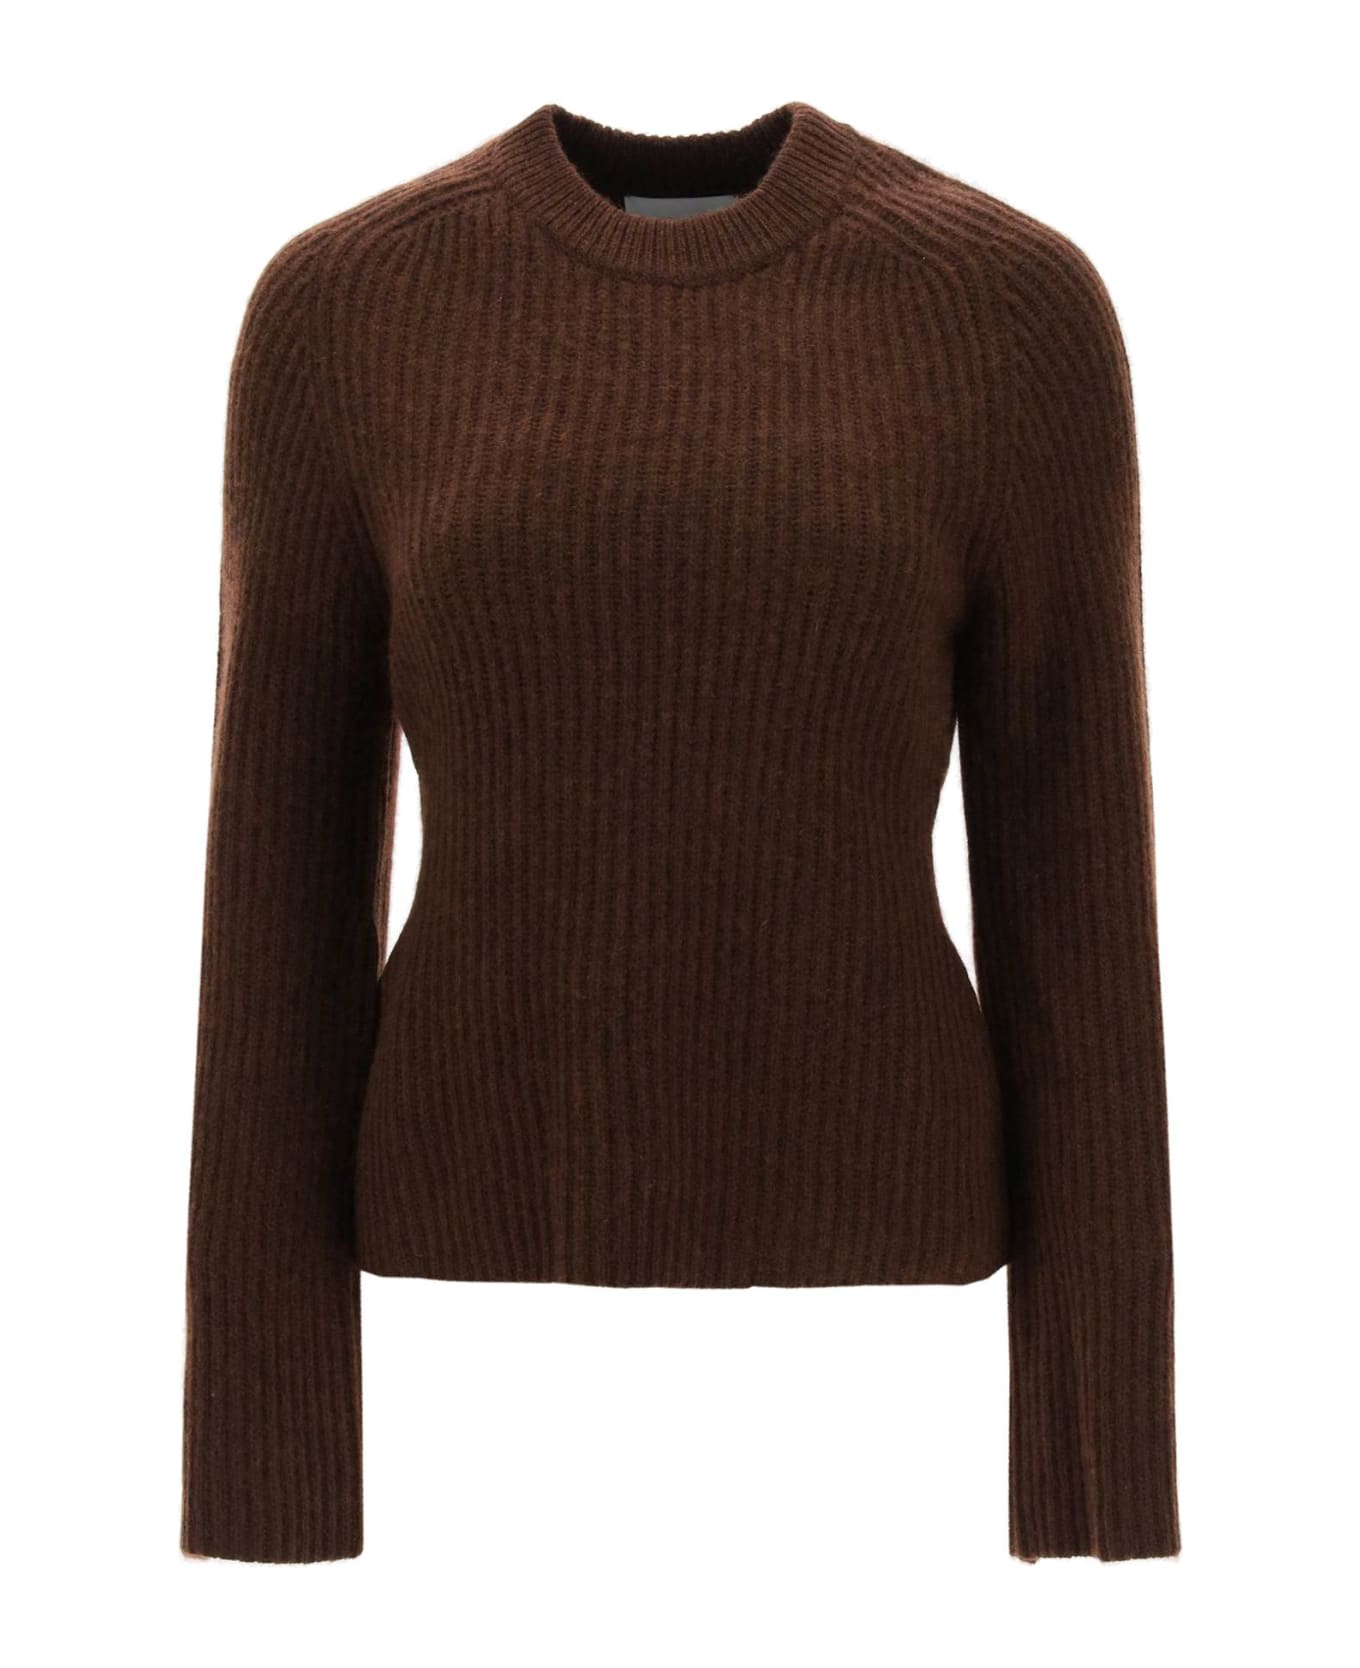 Loulou Studio 'kota' Cashmere Sweater With Bell Sleeves - CHOCO MELANGE (Brown)